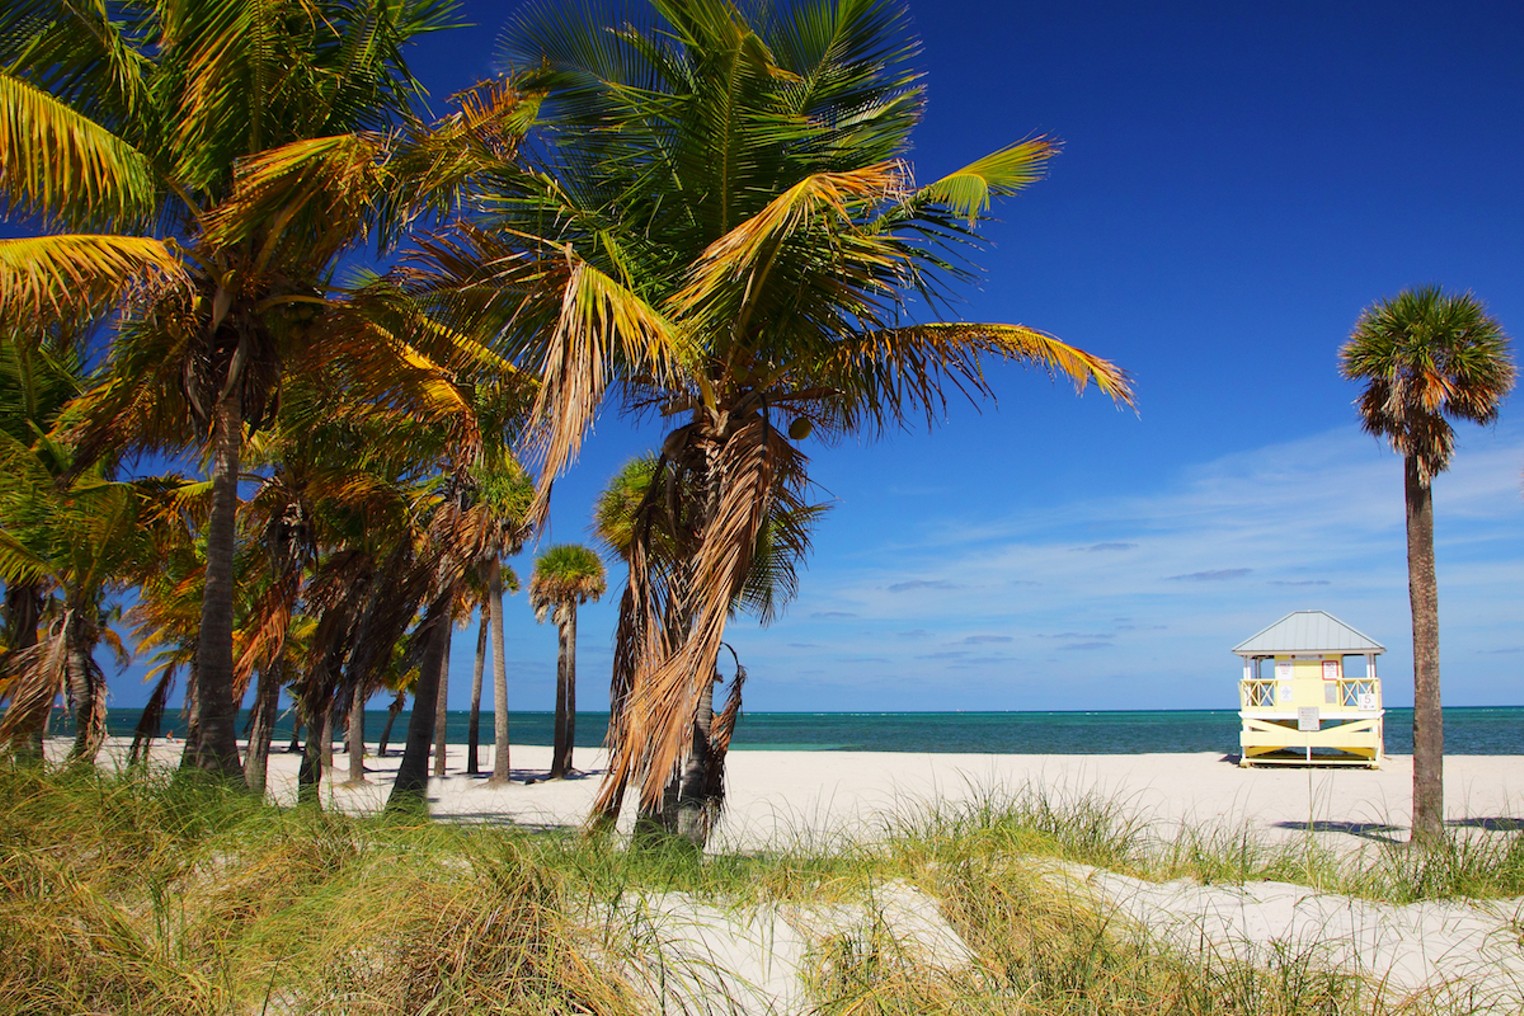 Best Beach (Miami) 2022 Crandon Park Beach Best Restaurants, Bars, Clubs, Music and Stores in Miami Miami New Times